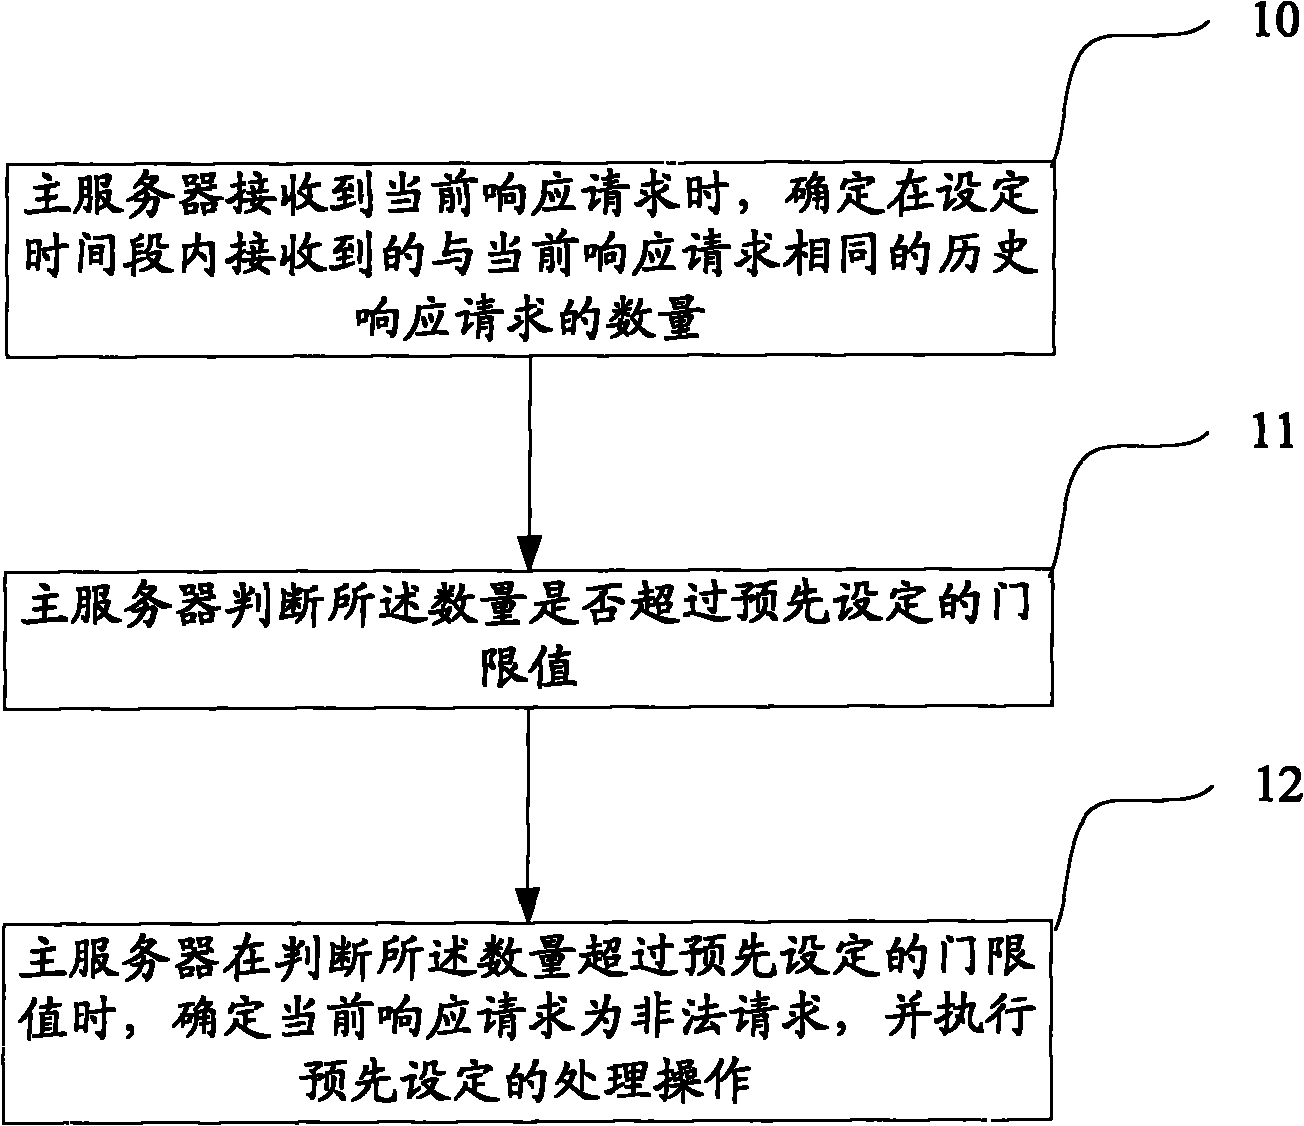 Method and system for detecting request safety